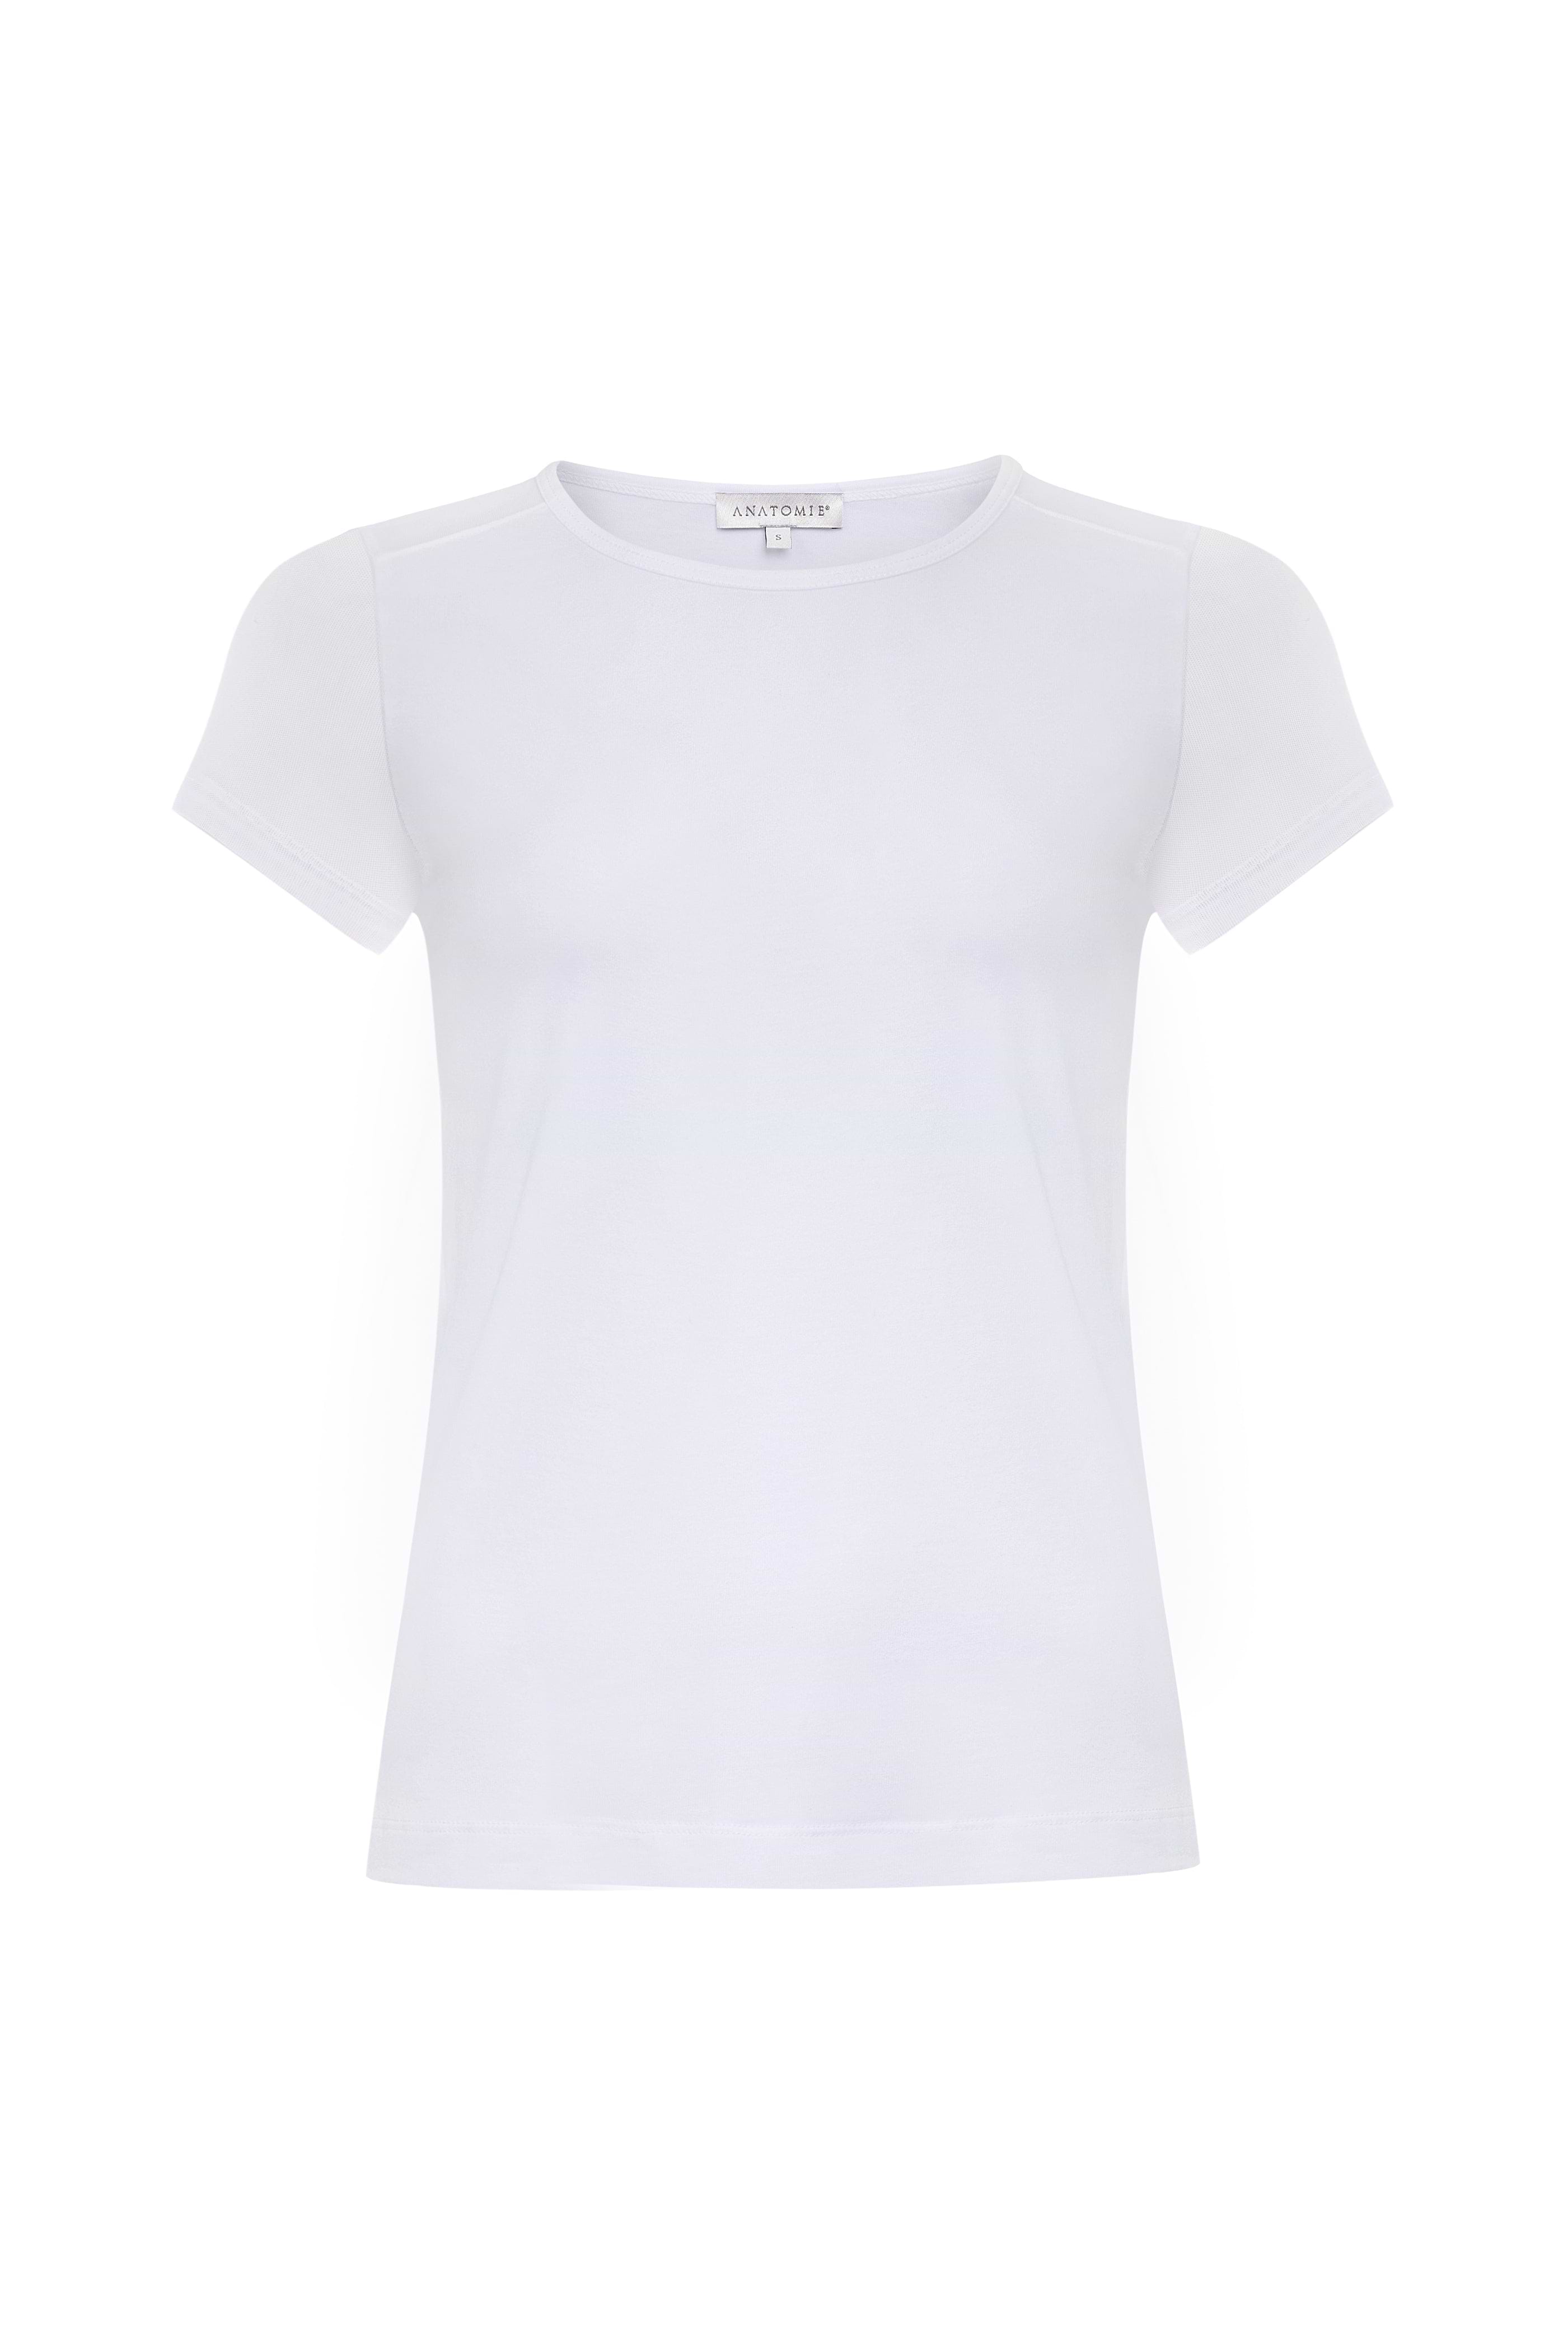 The Best Travel Shirt. Flat Lay of a Melissa Pima Cotton T-Shirt in White